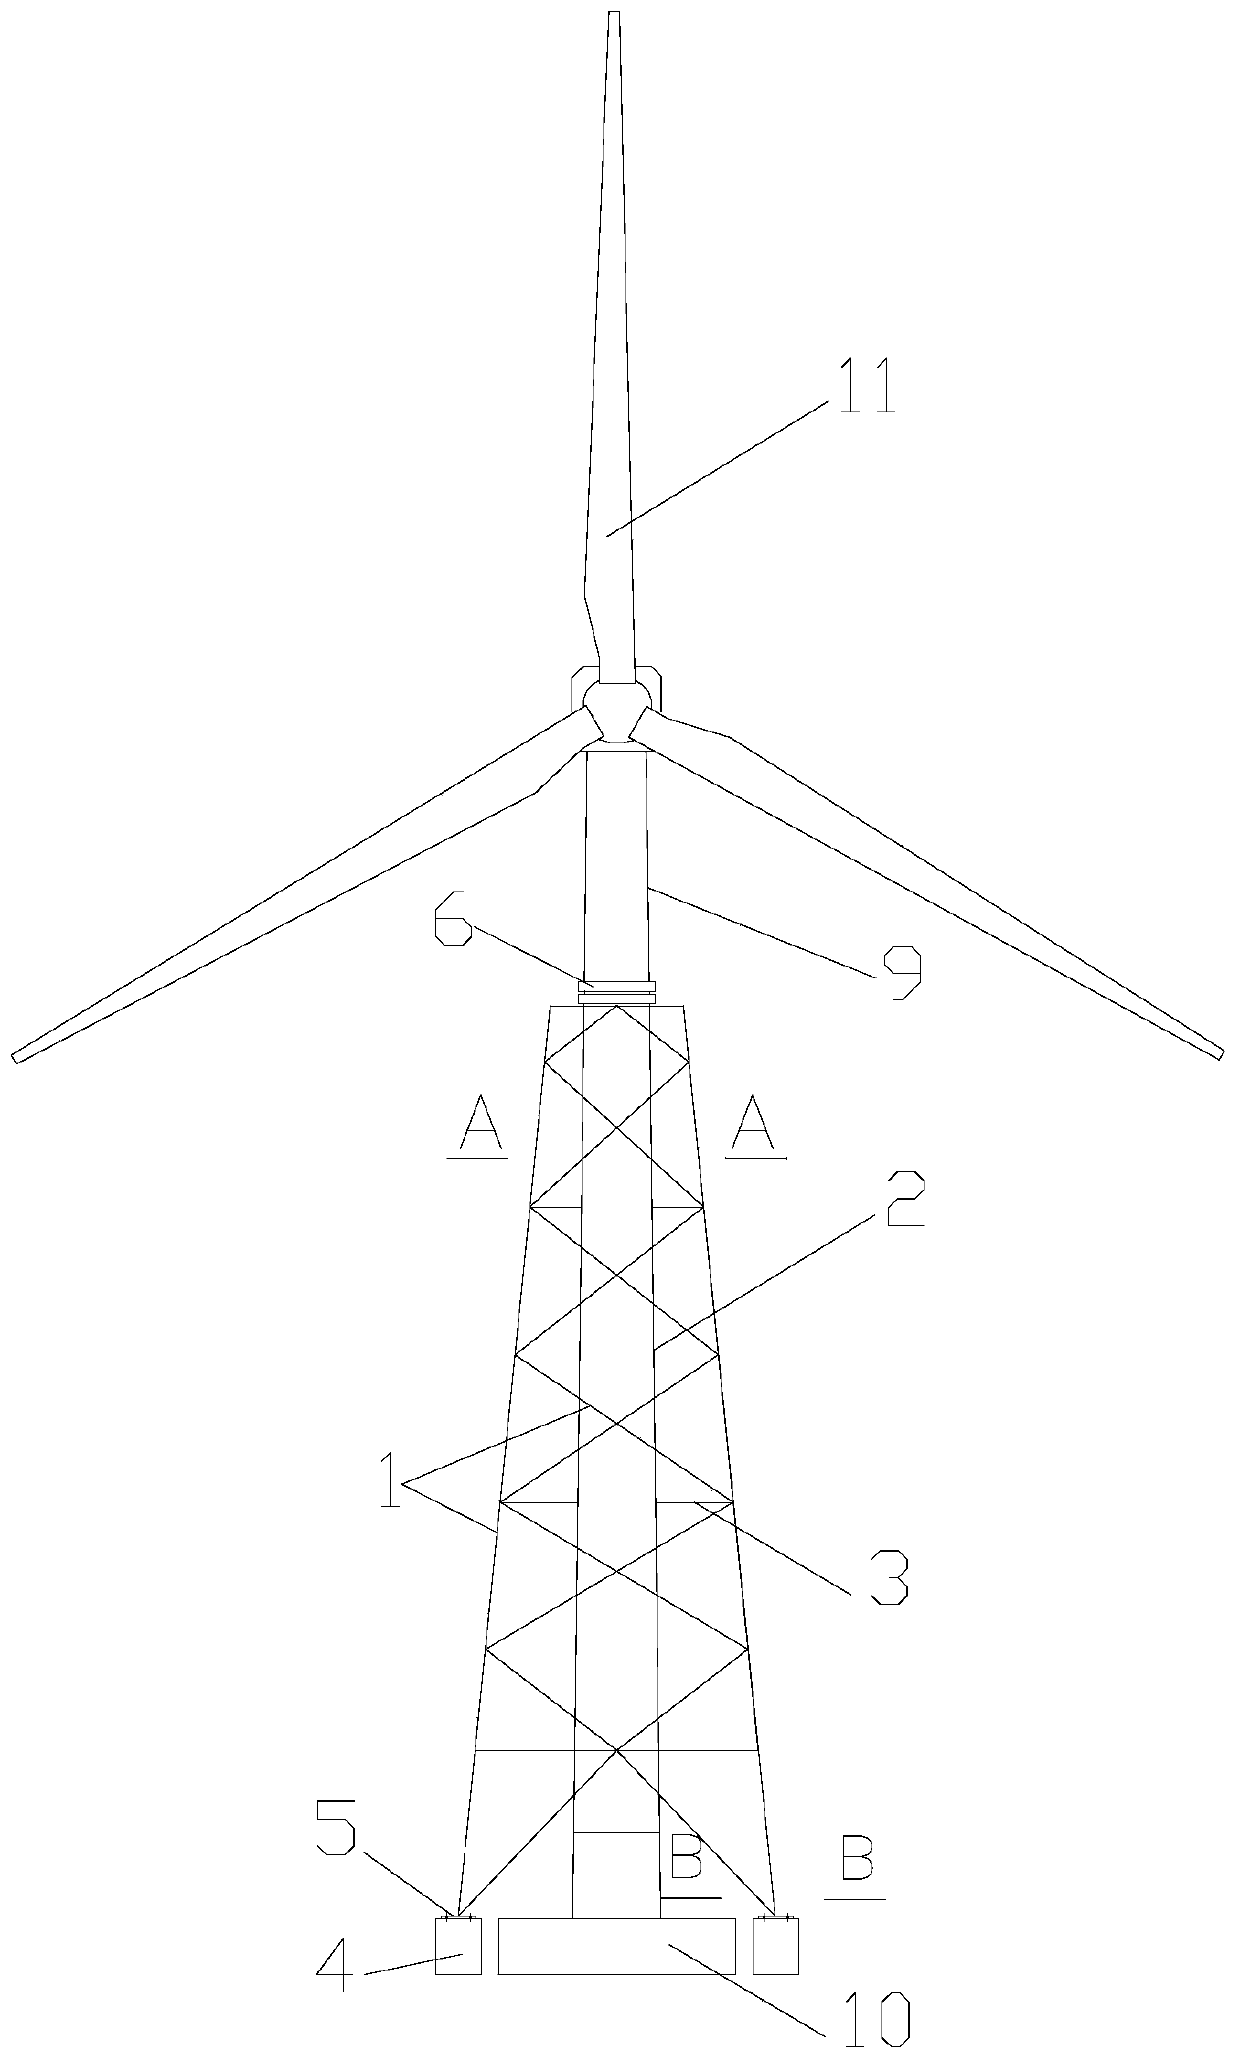 A wind power generating set expansion device